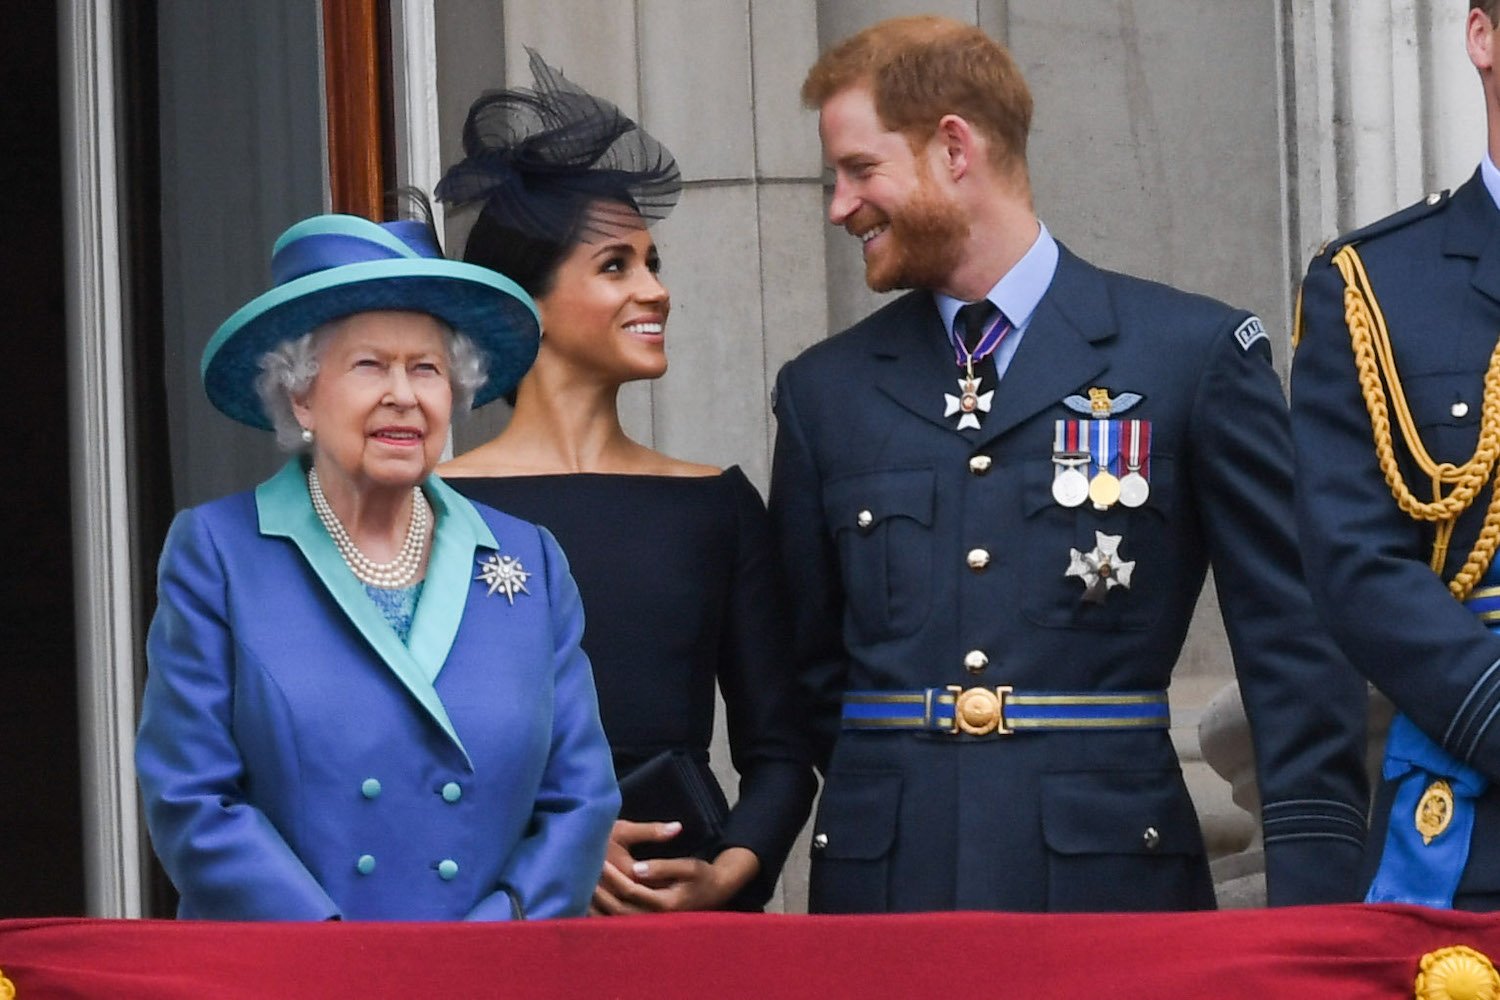 Queen Elizabeth ll, Meghan Markle, and Prince Harry stand on the balcony of Buckingham Palace for the centenary of the Royal Air Force (RAF)